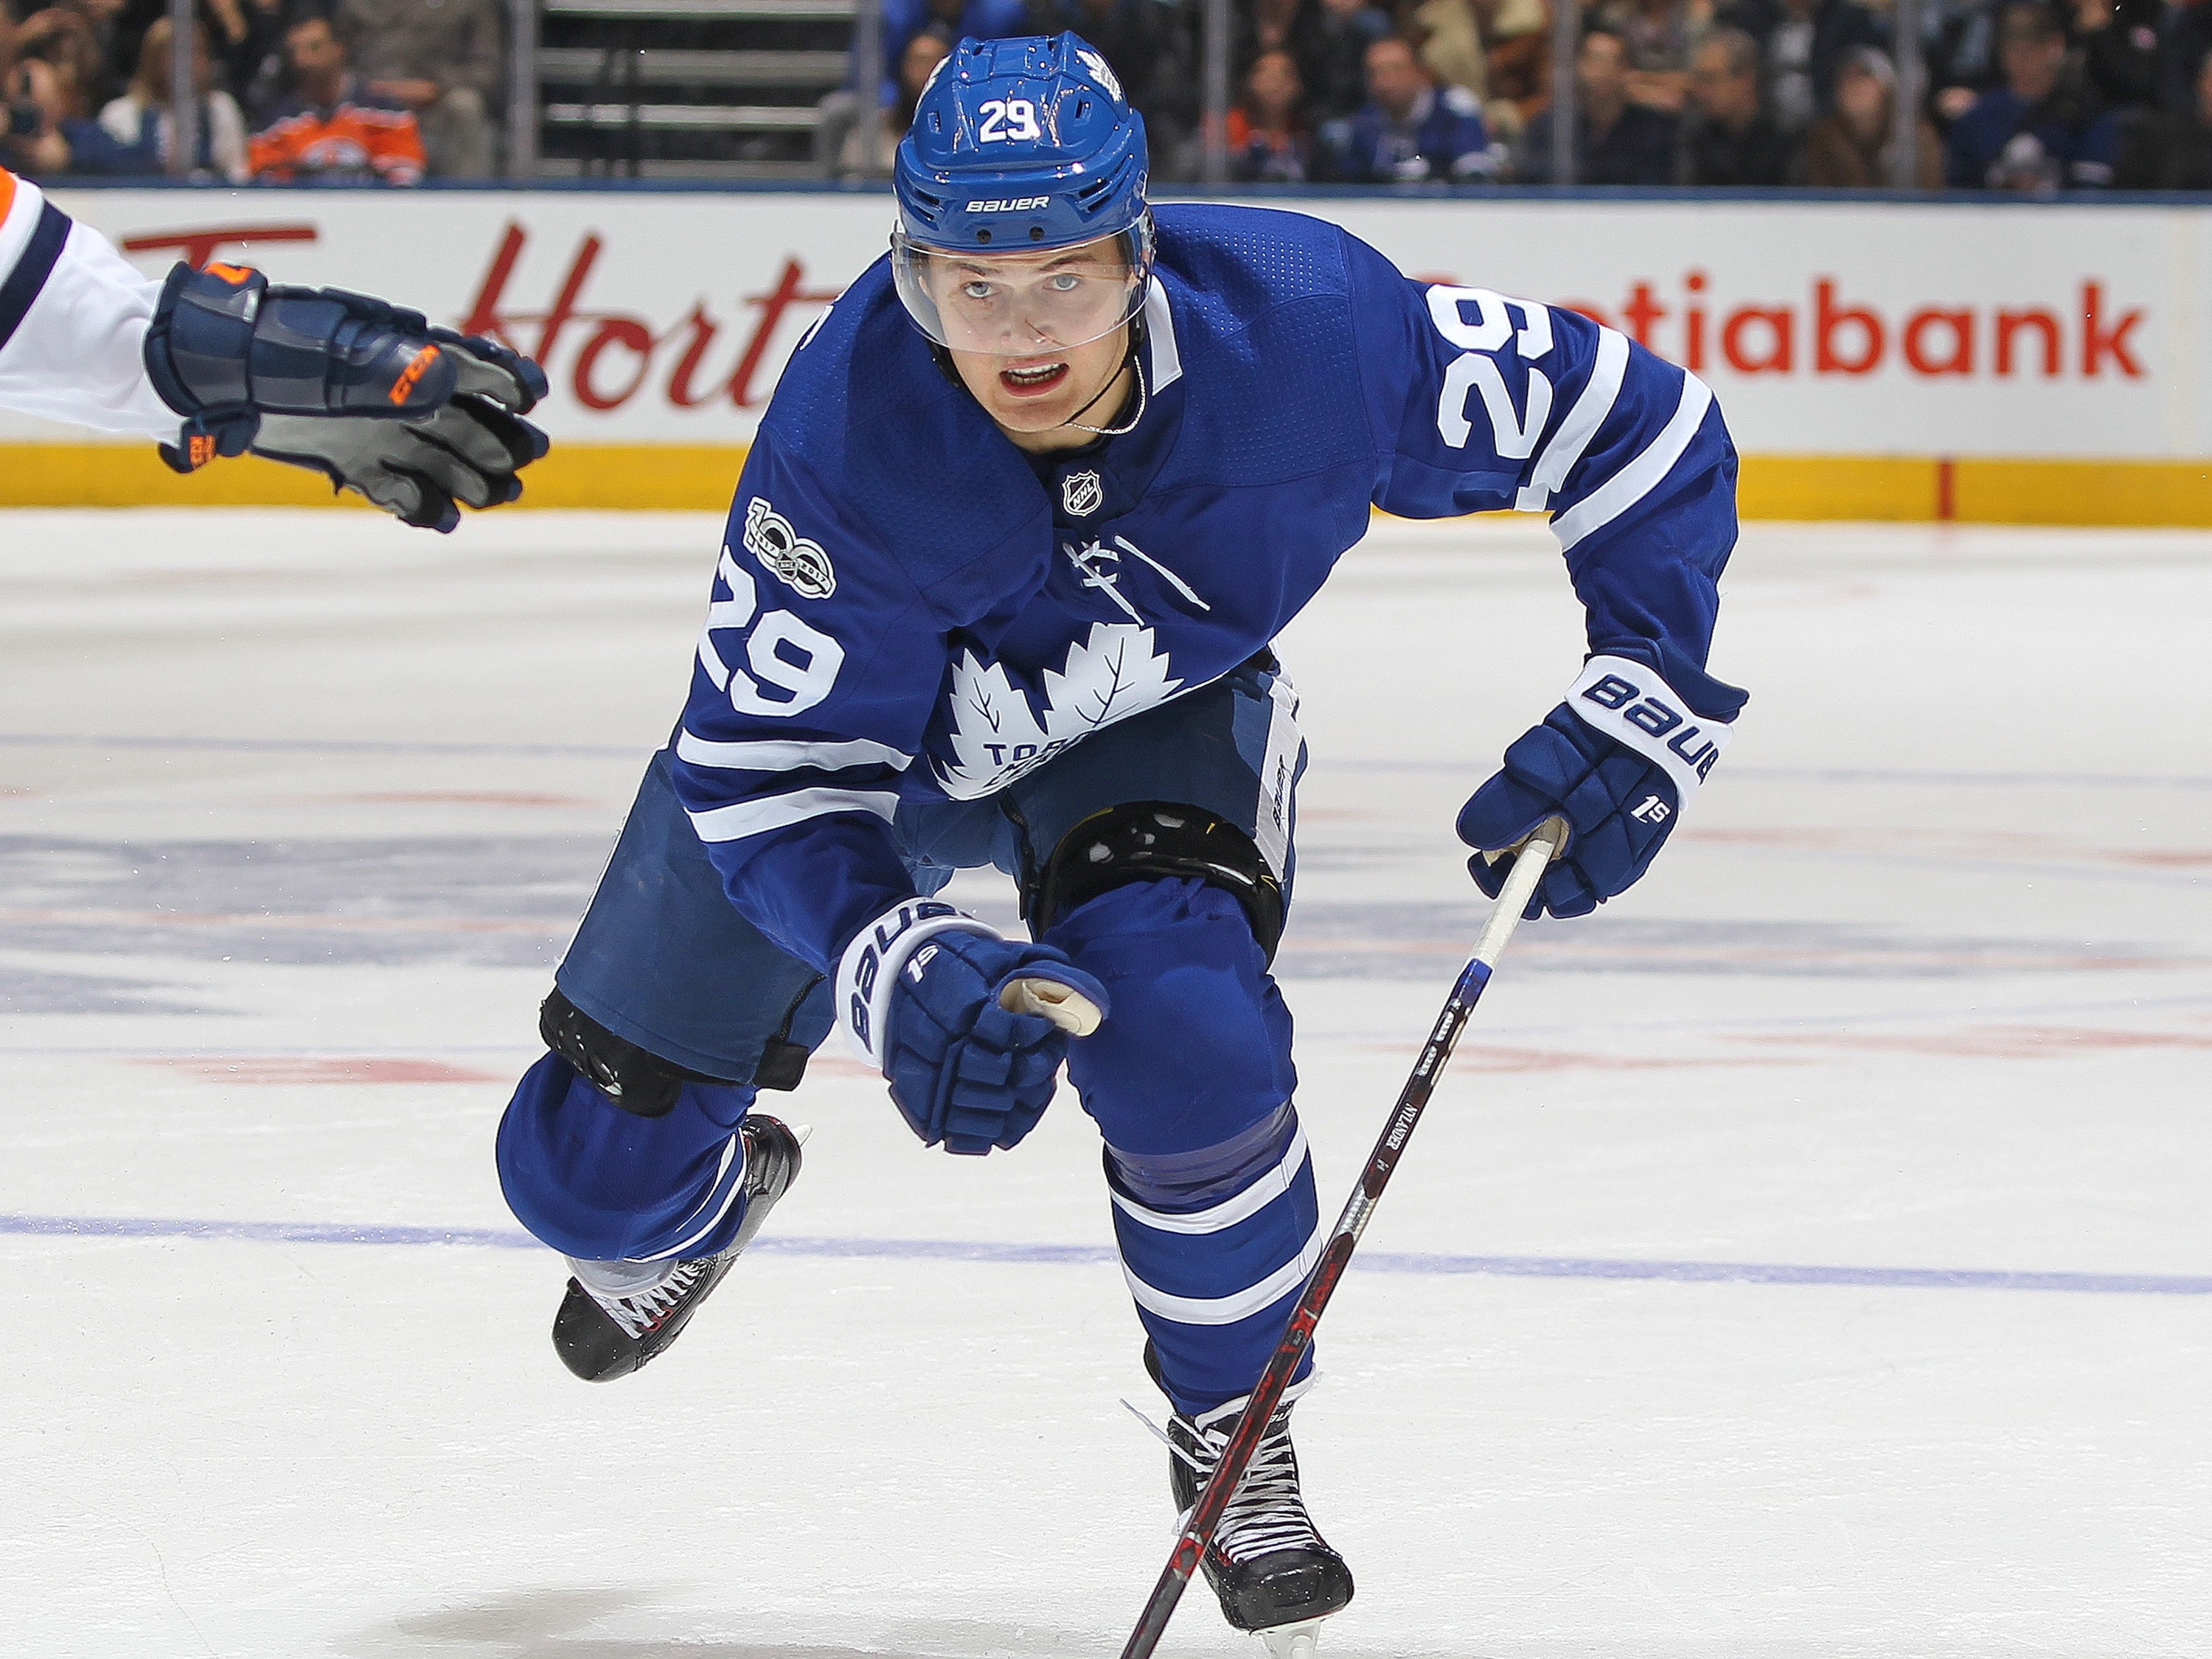 Toronto Maple Leafs: Is the William Nylander criticism justified?